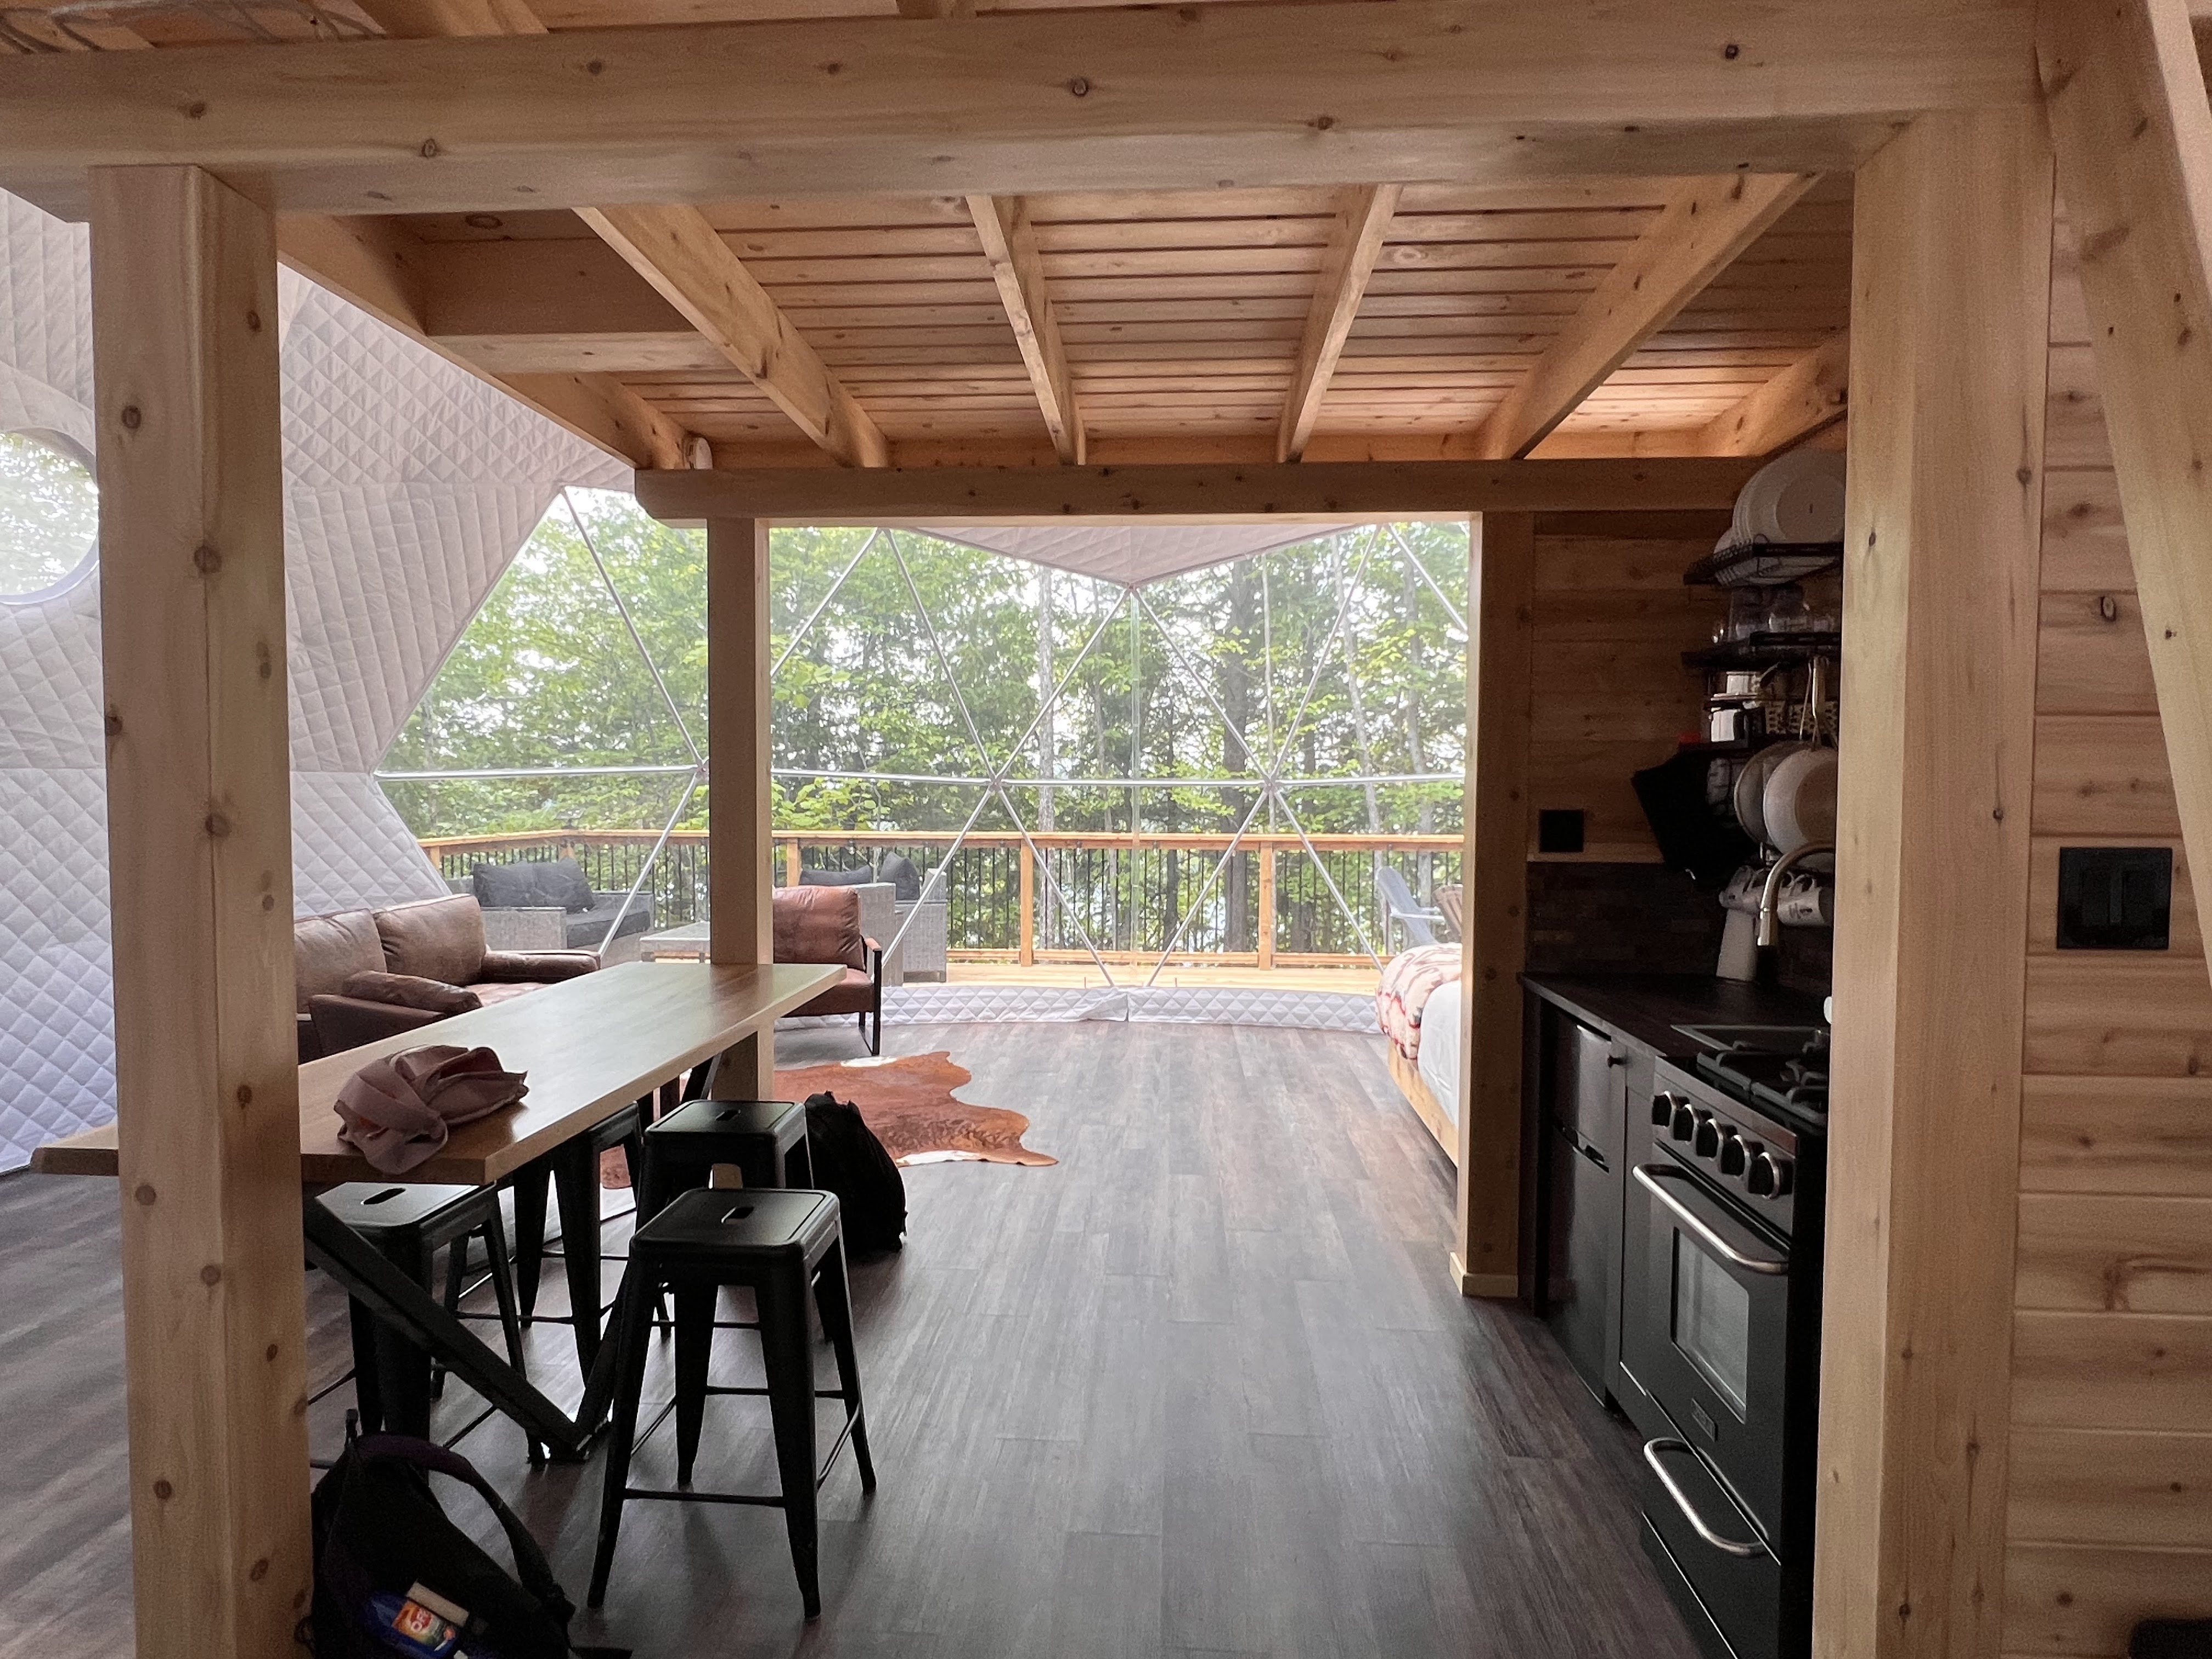 We stayed in the Maple House and loved the giant deck and bedroom loft area with a skylight.